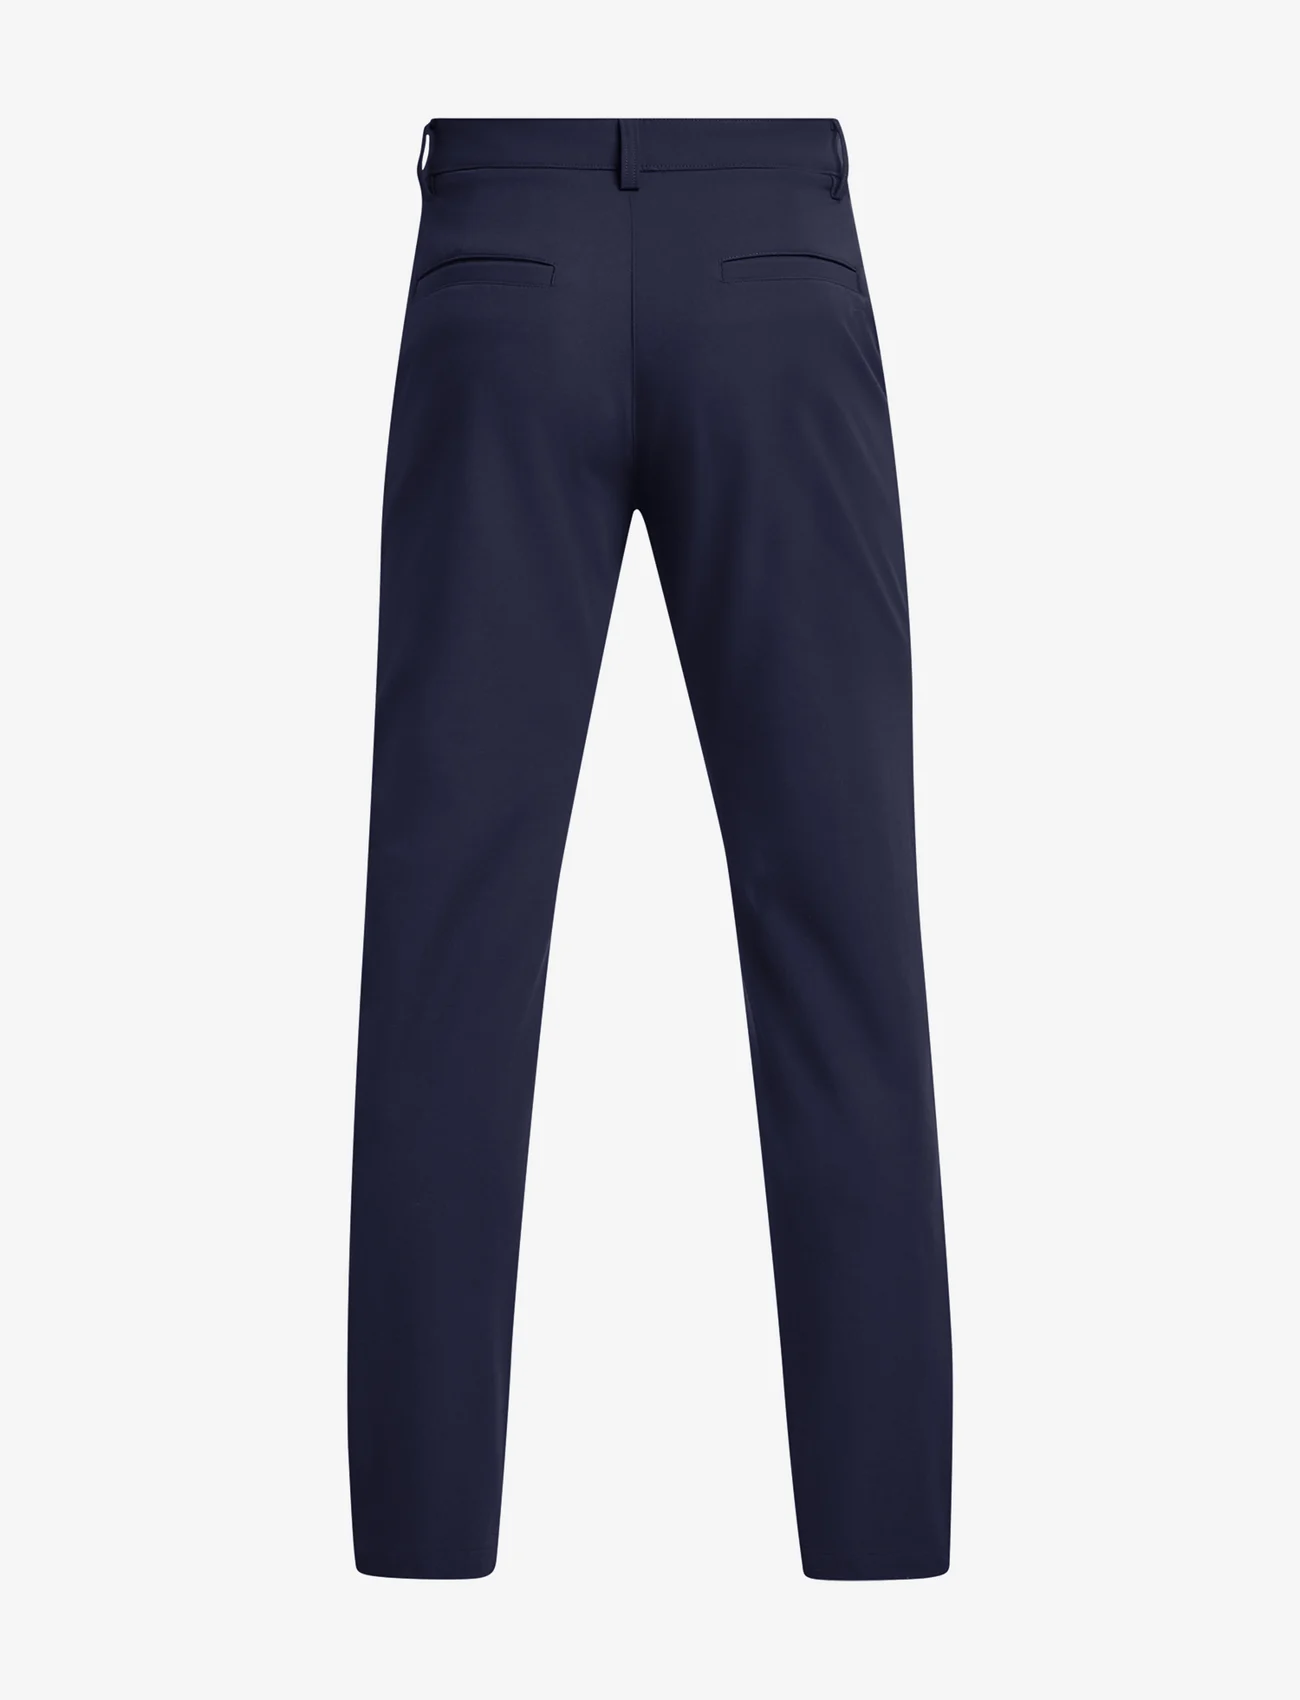 Under Armour - UA Tech Tapered Pant - golfbukser - midnight navy - 1